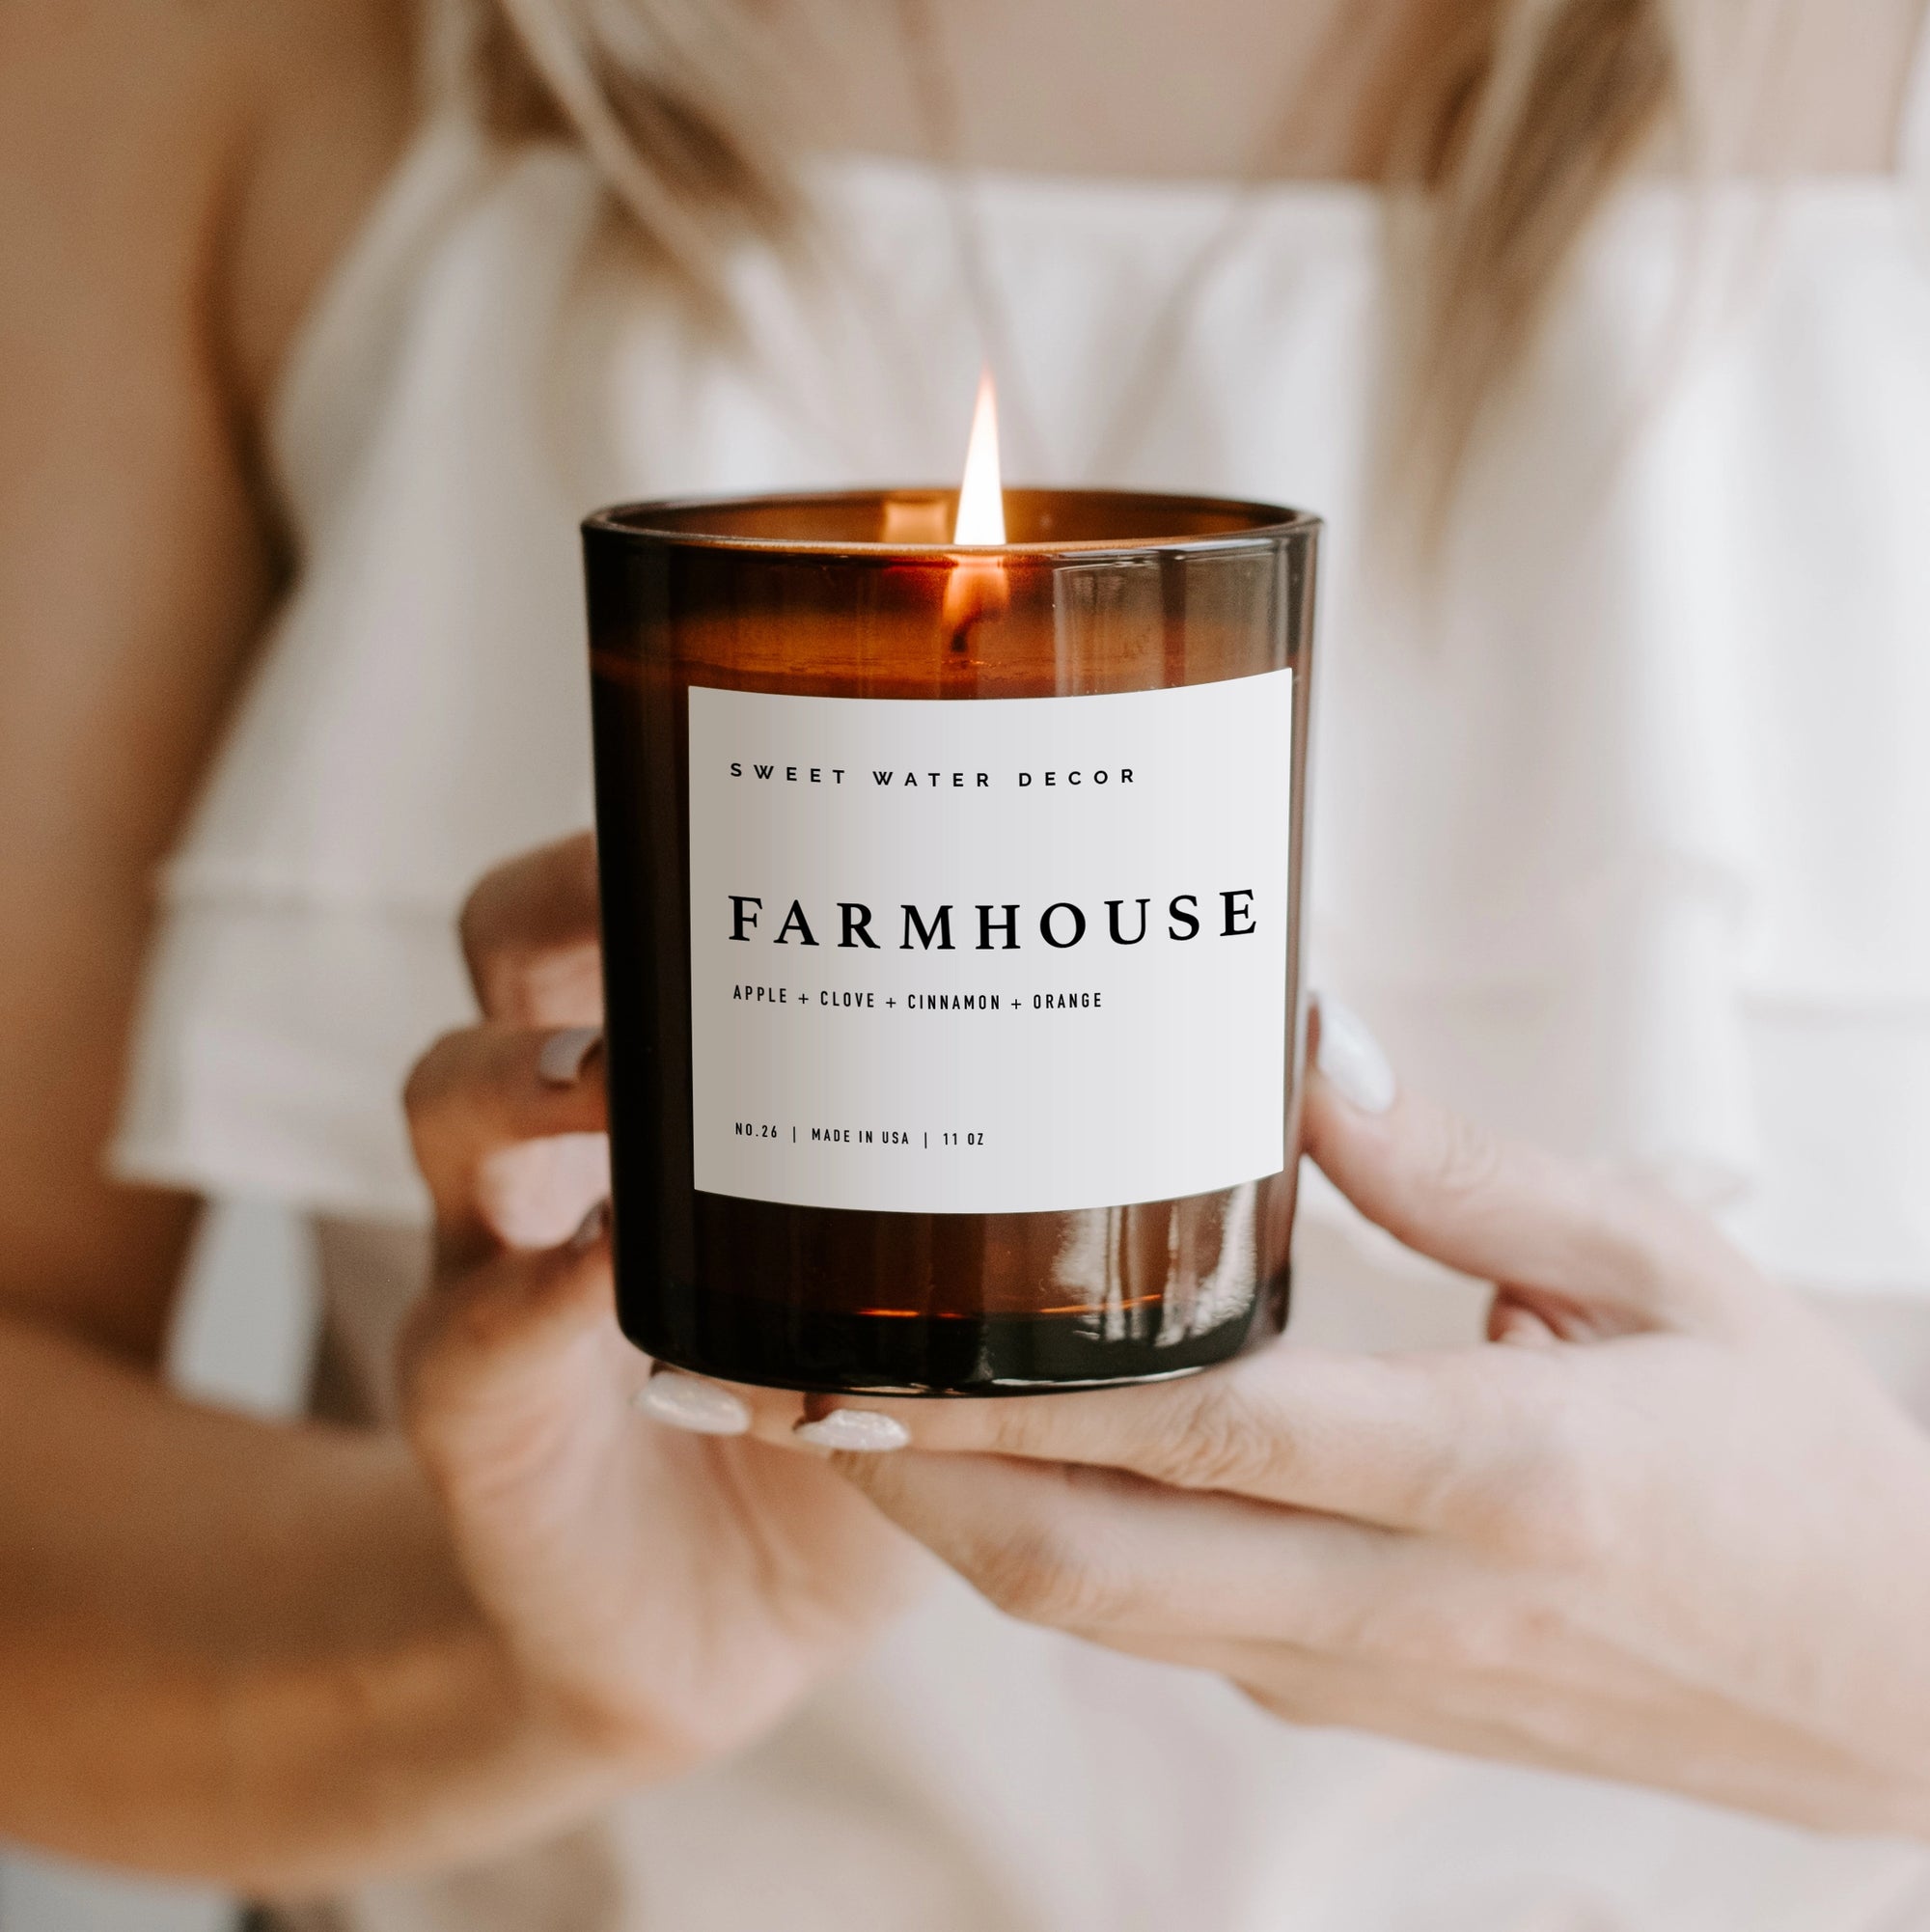 Farmhouse soy candle in amber jar, lit and held in two hands.